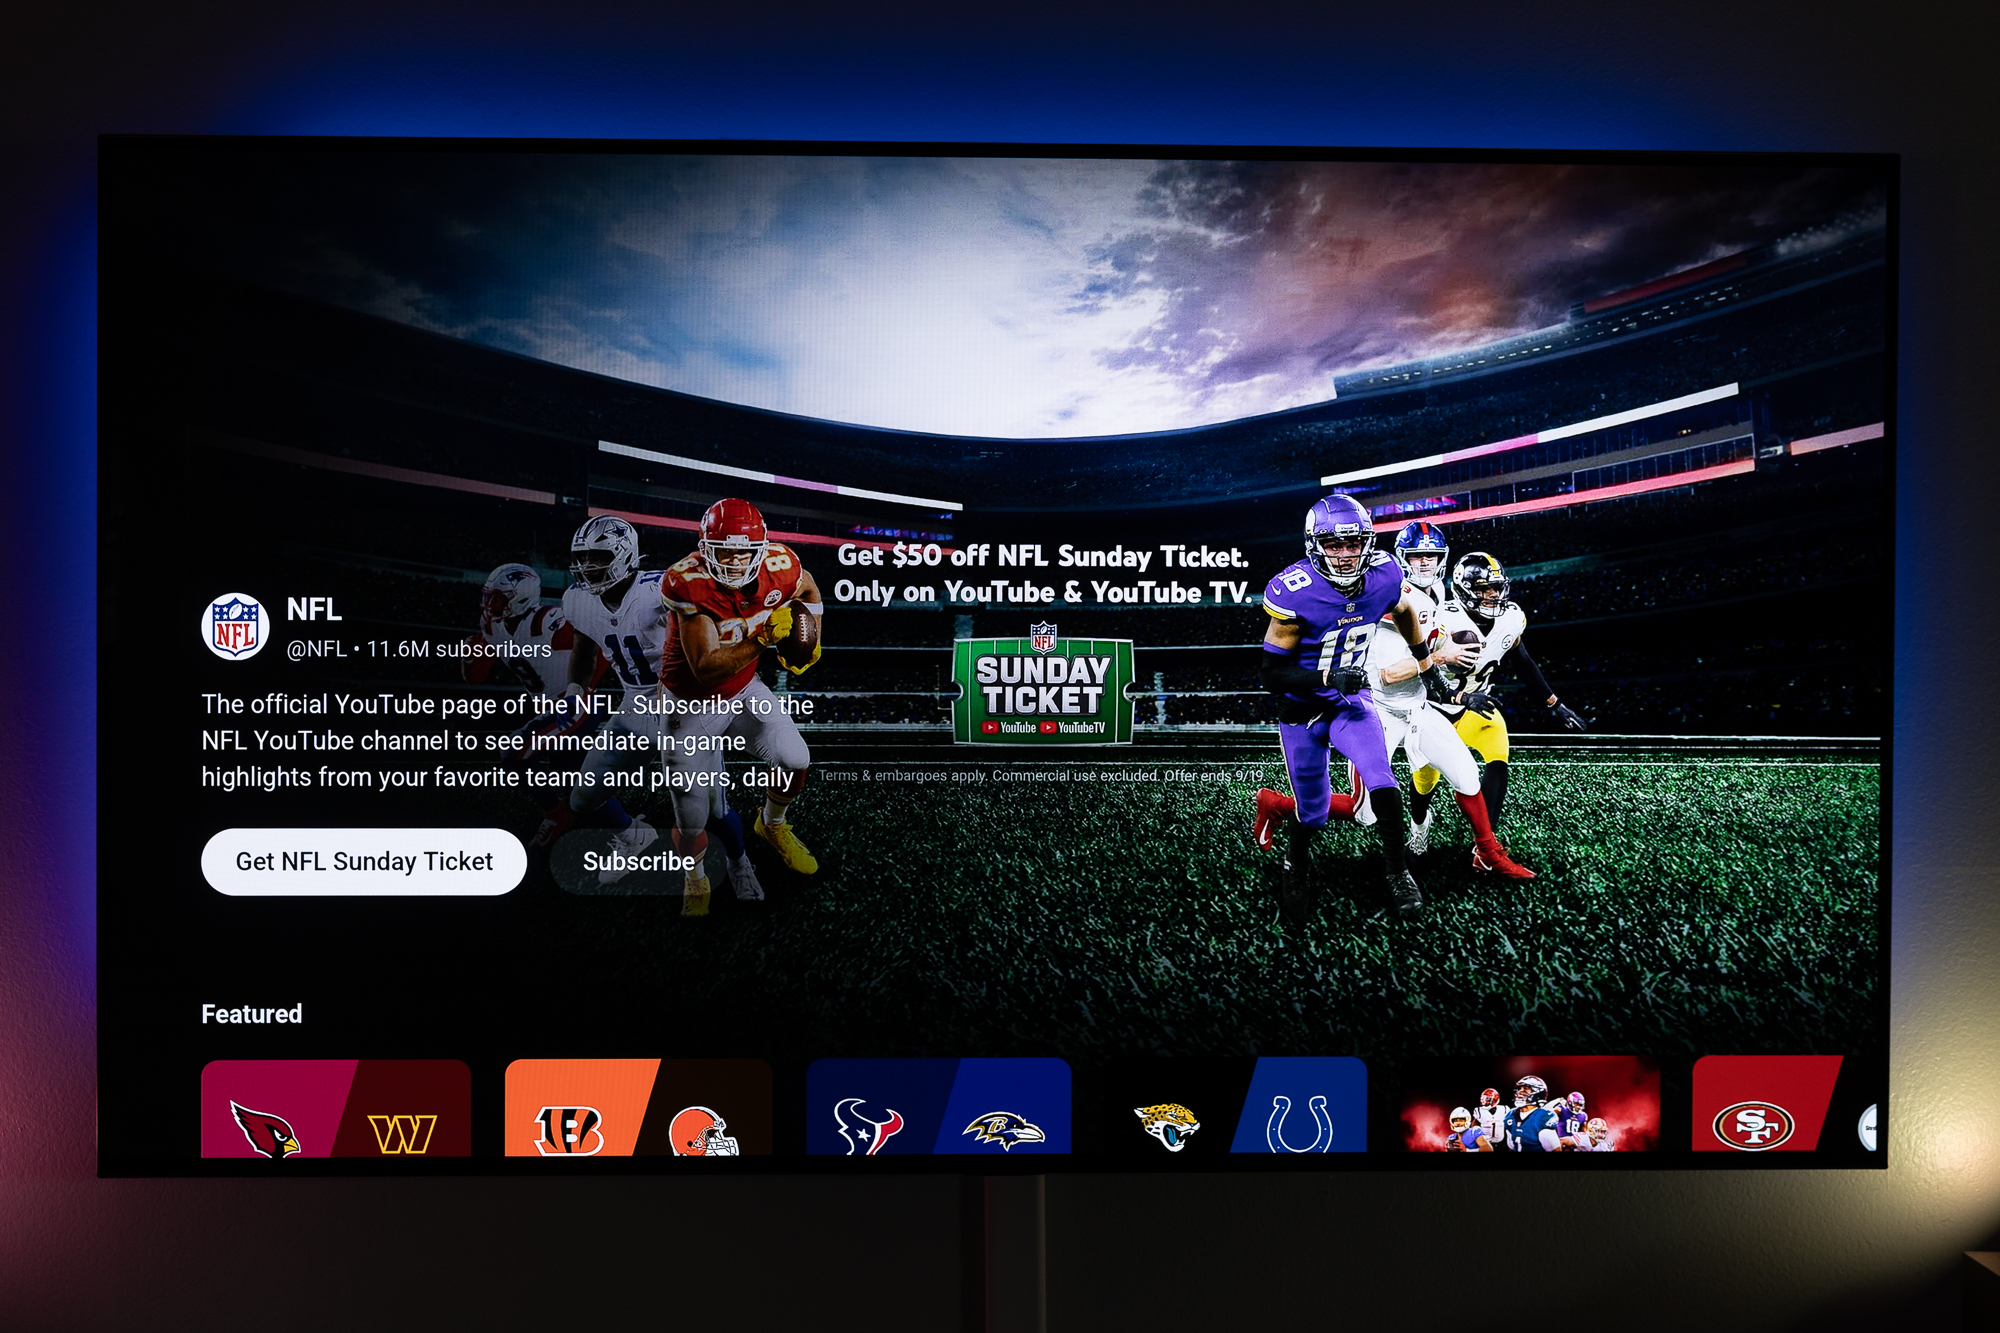 Up to $200 off NFL Sunday Ticket with Purchase of Select TCL TV